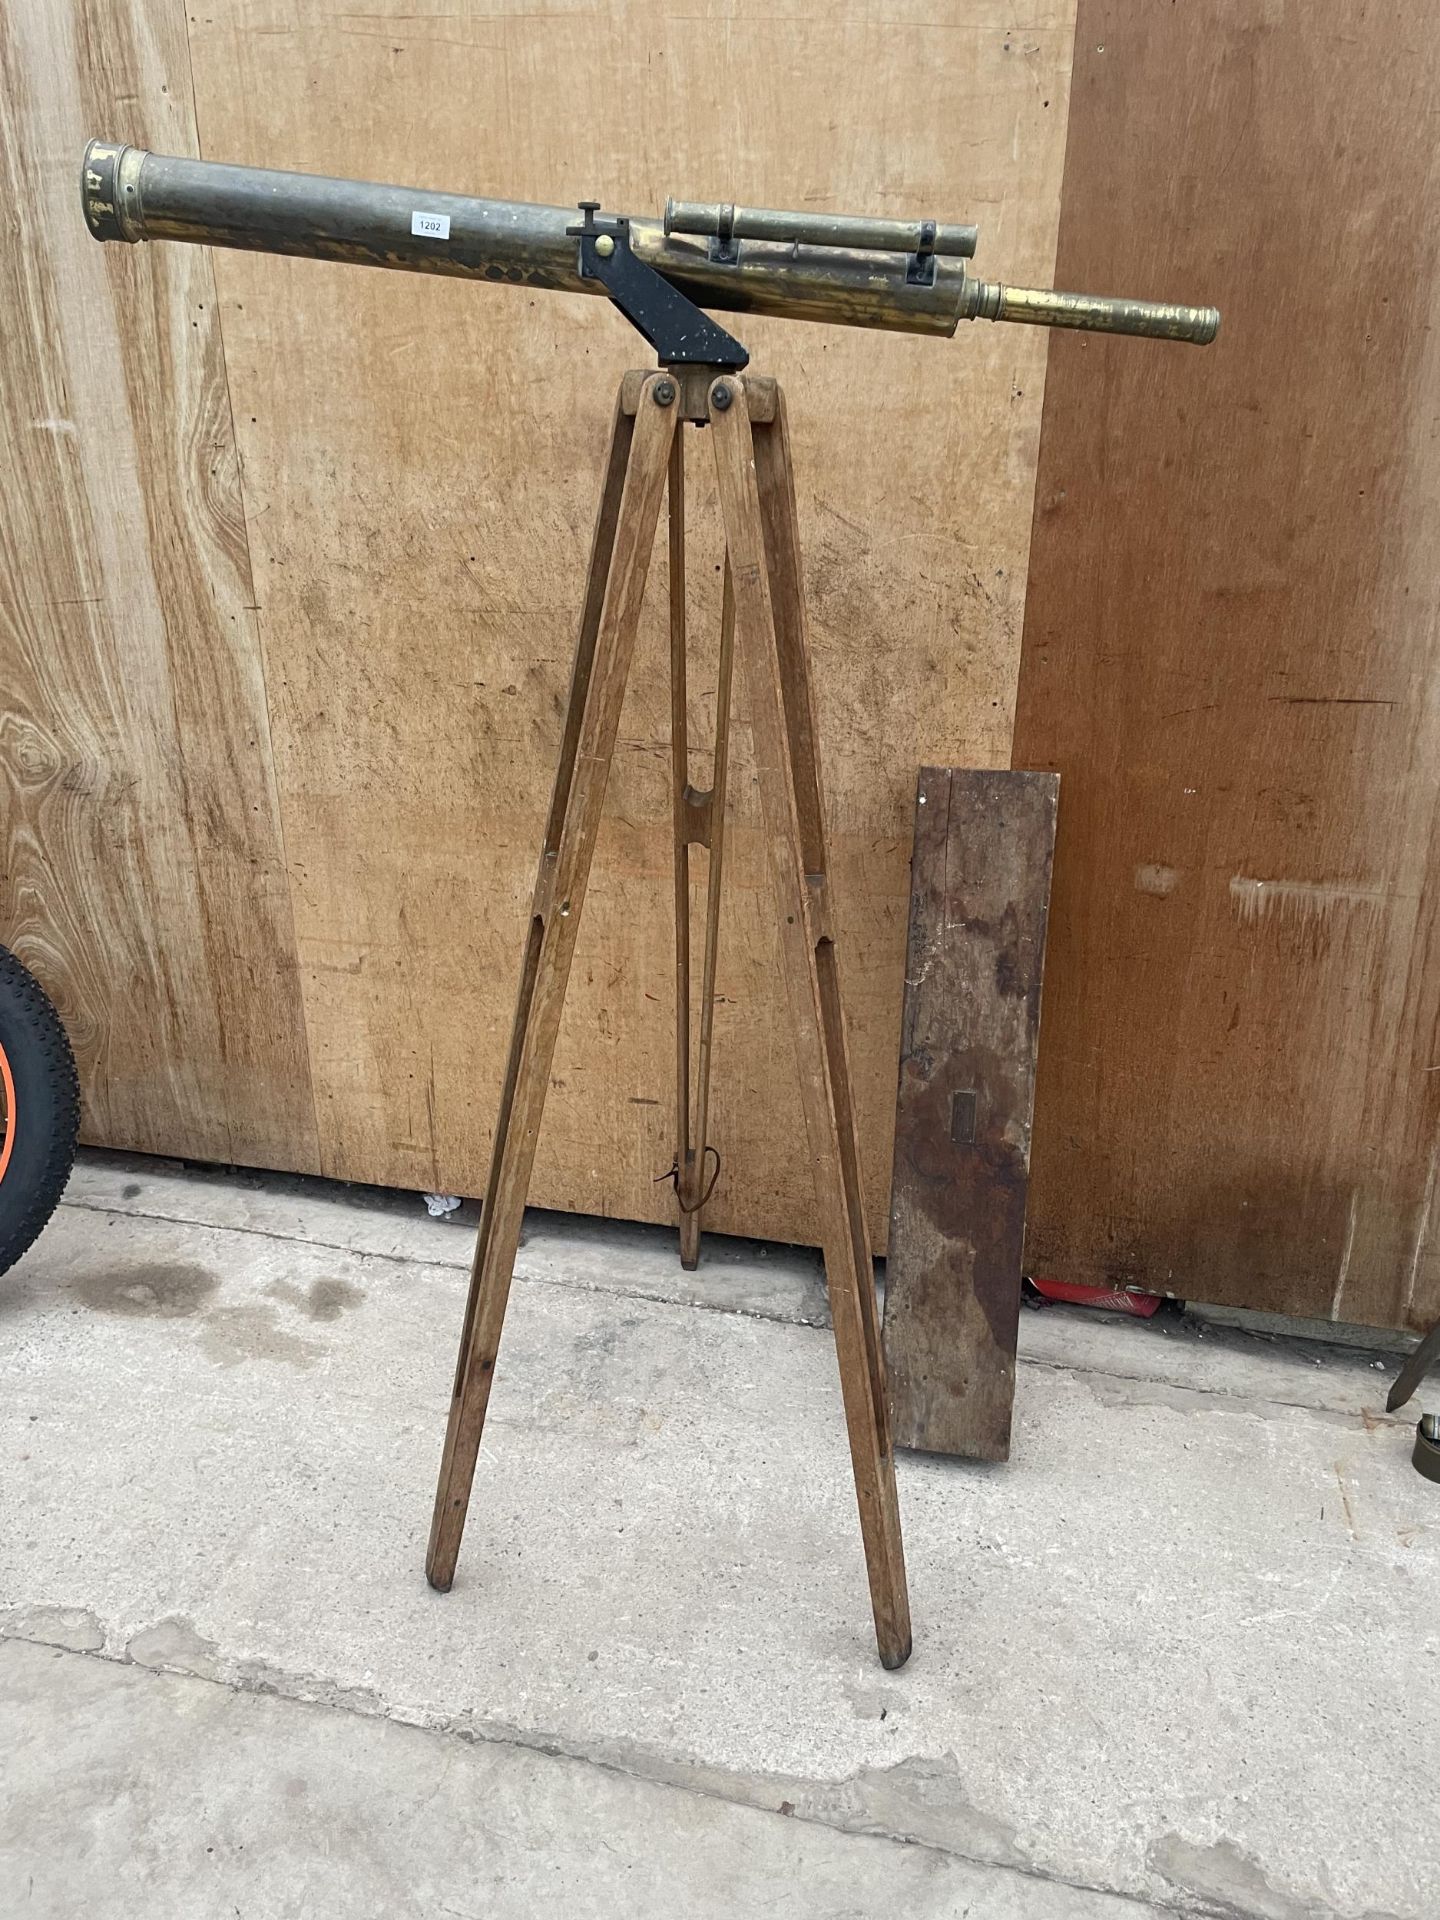 A VINTAGE BRASS FLATTERS AND GARNETT LTD TELESCOPE WITH VINTAGE WOODEN TRIPOD STAND AND WOODEN CARRY